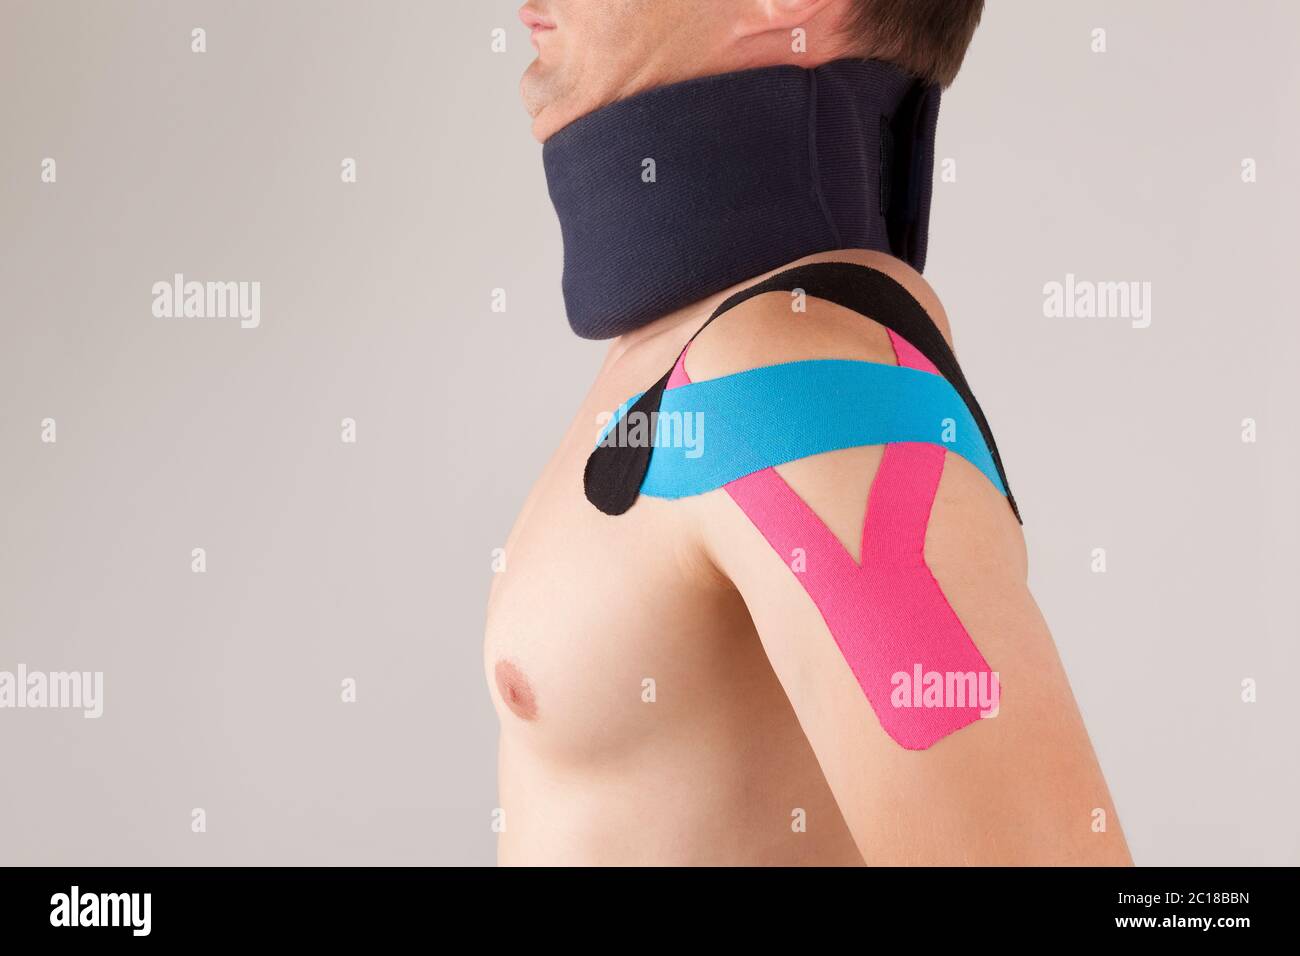 Kinesio taping for stabilizing shoulder Stock Photo